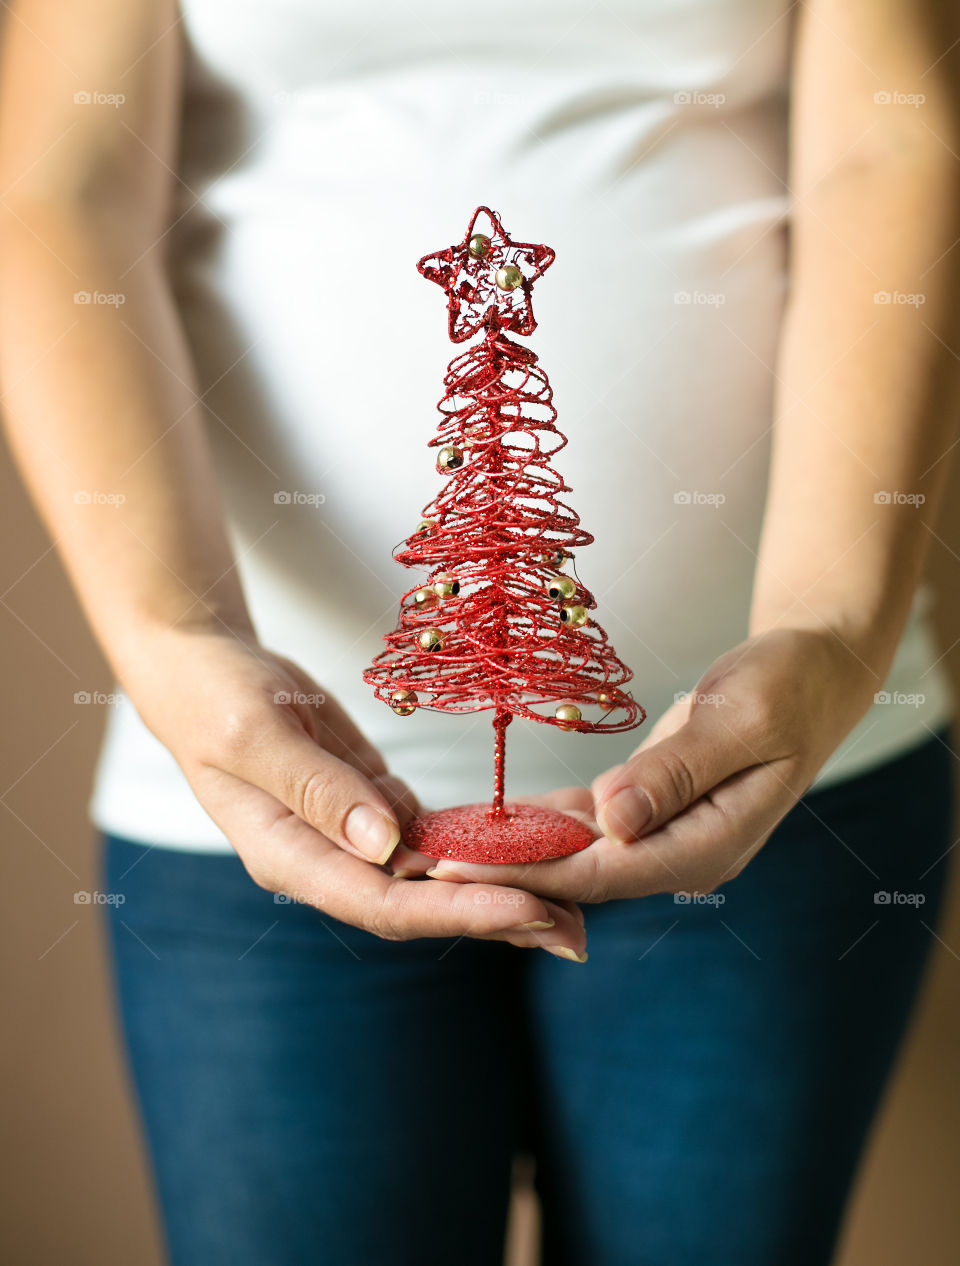 Midsection view of pregnant woman holding Christmas tree